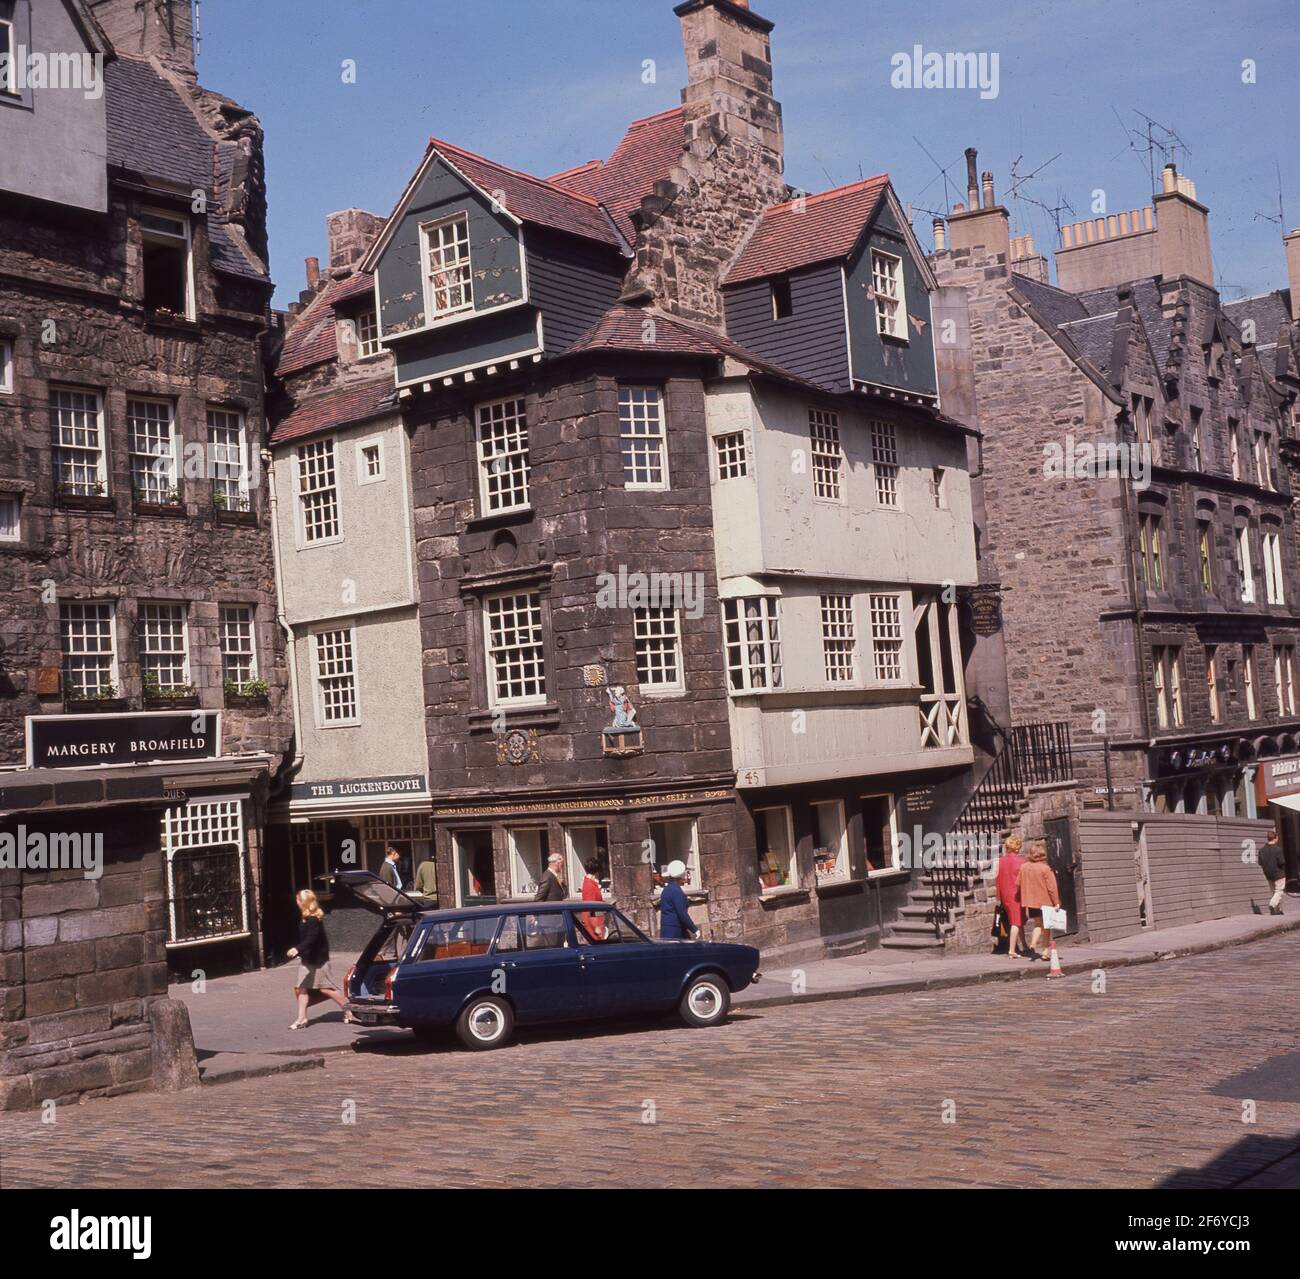 1960s, historical, exterior view of John Knox house, an ancient medieval building building on the city's famous 'Royal Mile', Edinburgh, Scotland, UK. Also know as John Knox's house and dating back to 1470, it is said, although debated that it was, to have been the final residence of Protestant reformer, John Knox. It is the only surviving medieval house in Edinburgh. The home at one time, of James Mossman, goldsmith to Mary Queen of Scots, it is considered one of Scotland's greatest ciultural treasures. Stock Photo